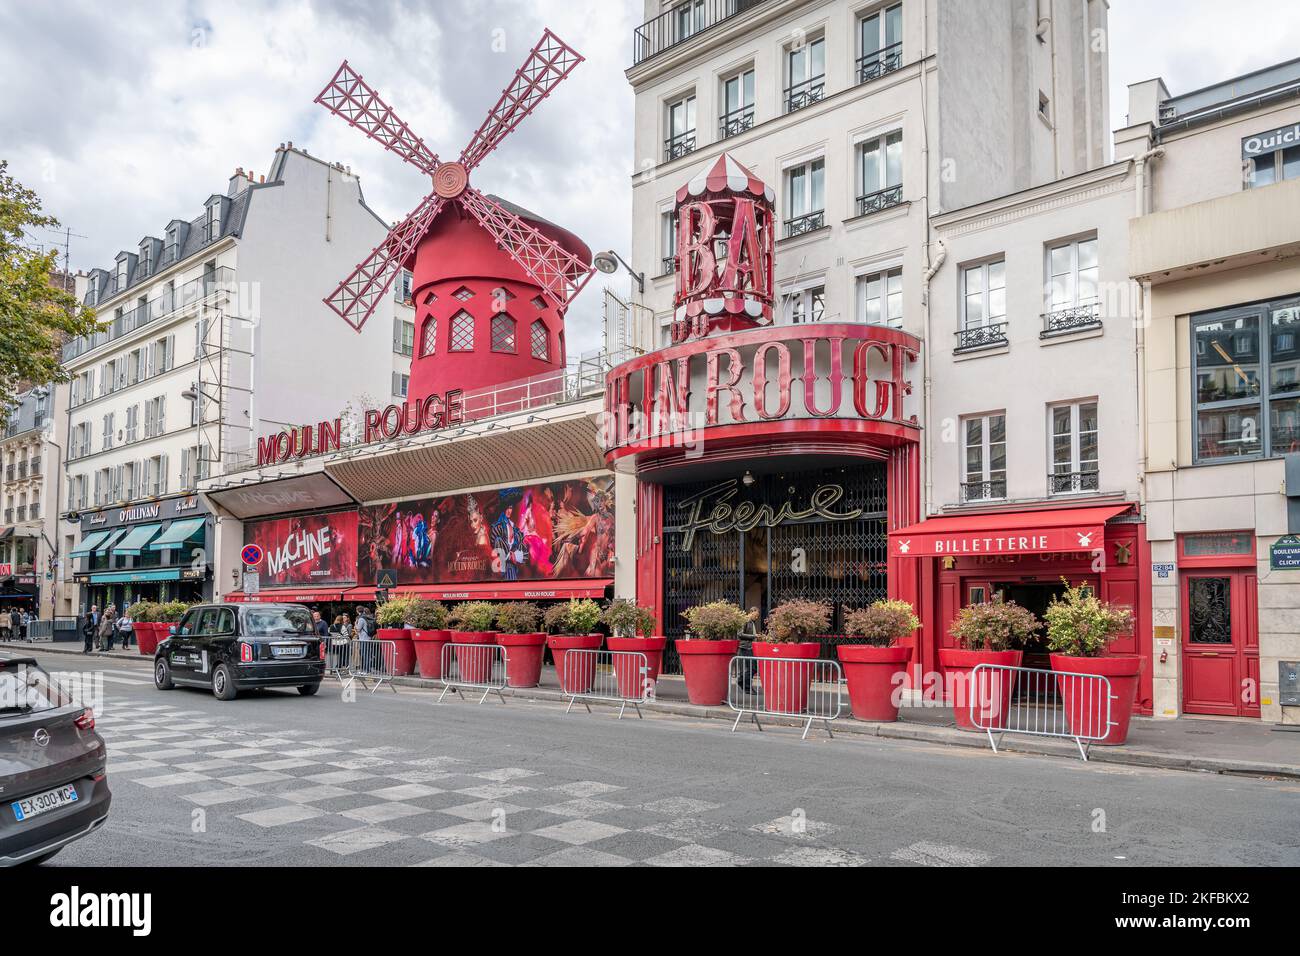 Moulin Rouge sign and Red Windmill, Paris, France Stock Photo